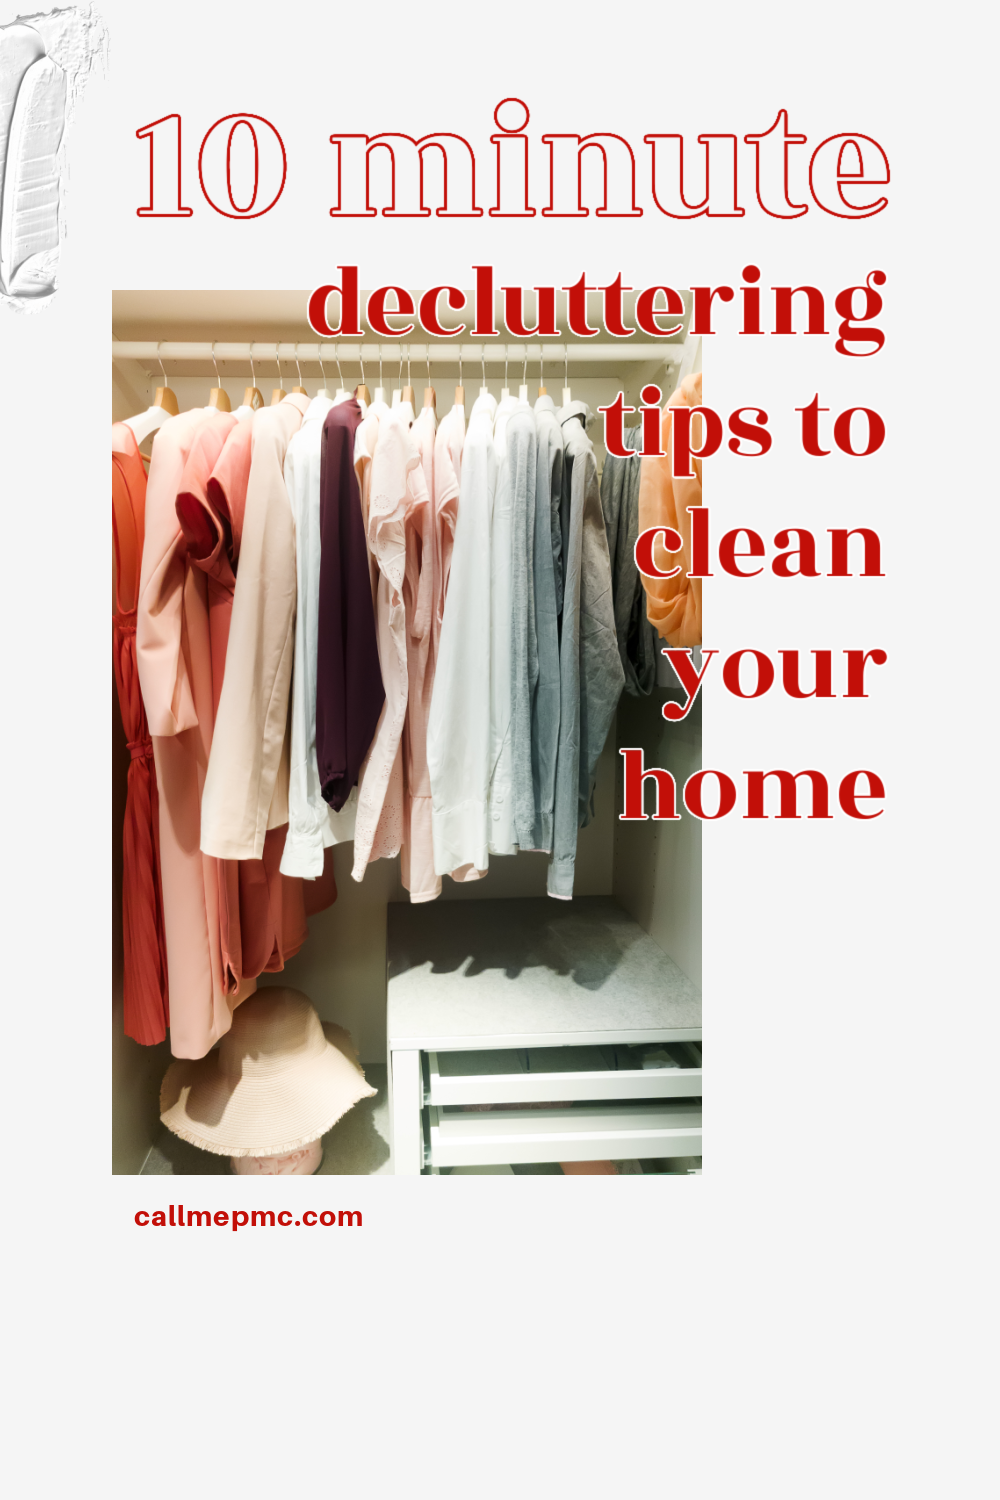 Quick and effective 10-minute decluttering tips to clean your home.